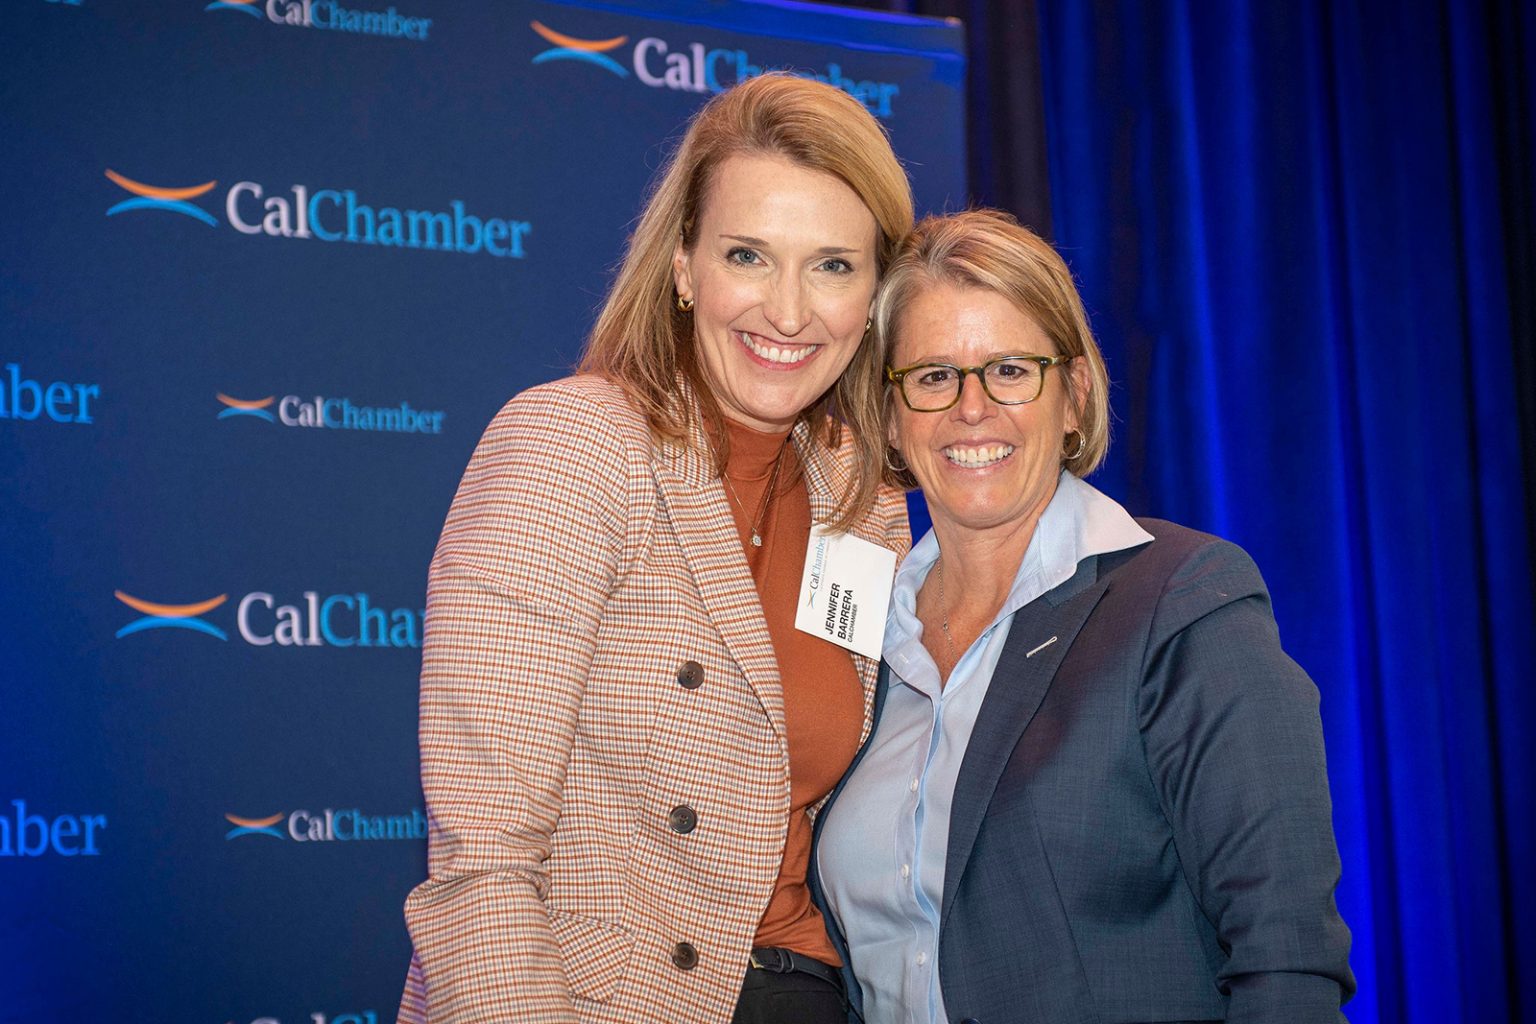 CalChamber President and CEO Jennifer Barrera (left) moderates a look at what’s coming in Governor Gavin Newsom’s second term in office featuring comments by Christy Bouma (right), the Governor’s legislative affairs secretary.